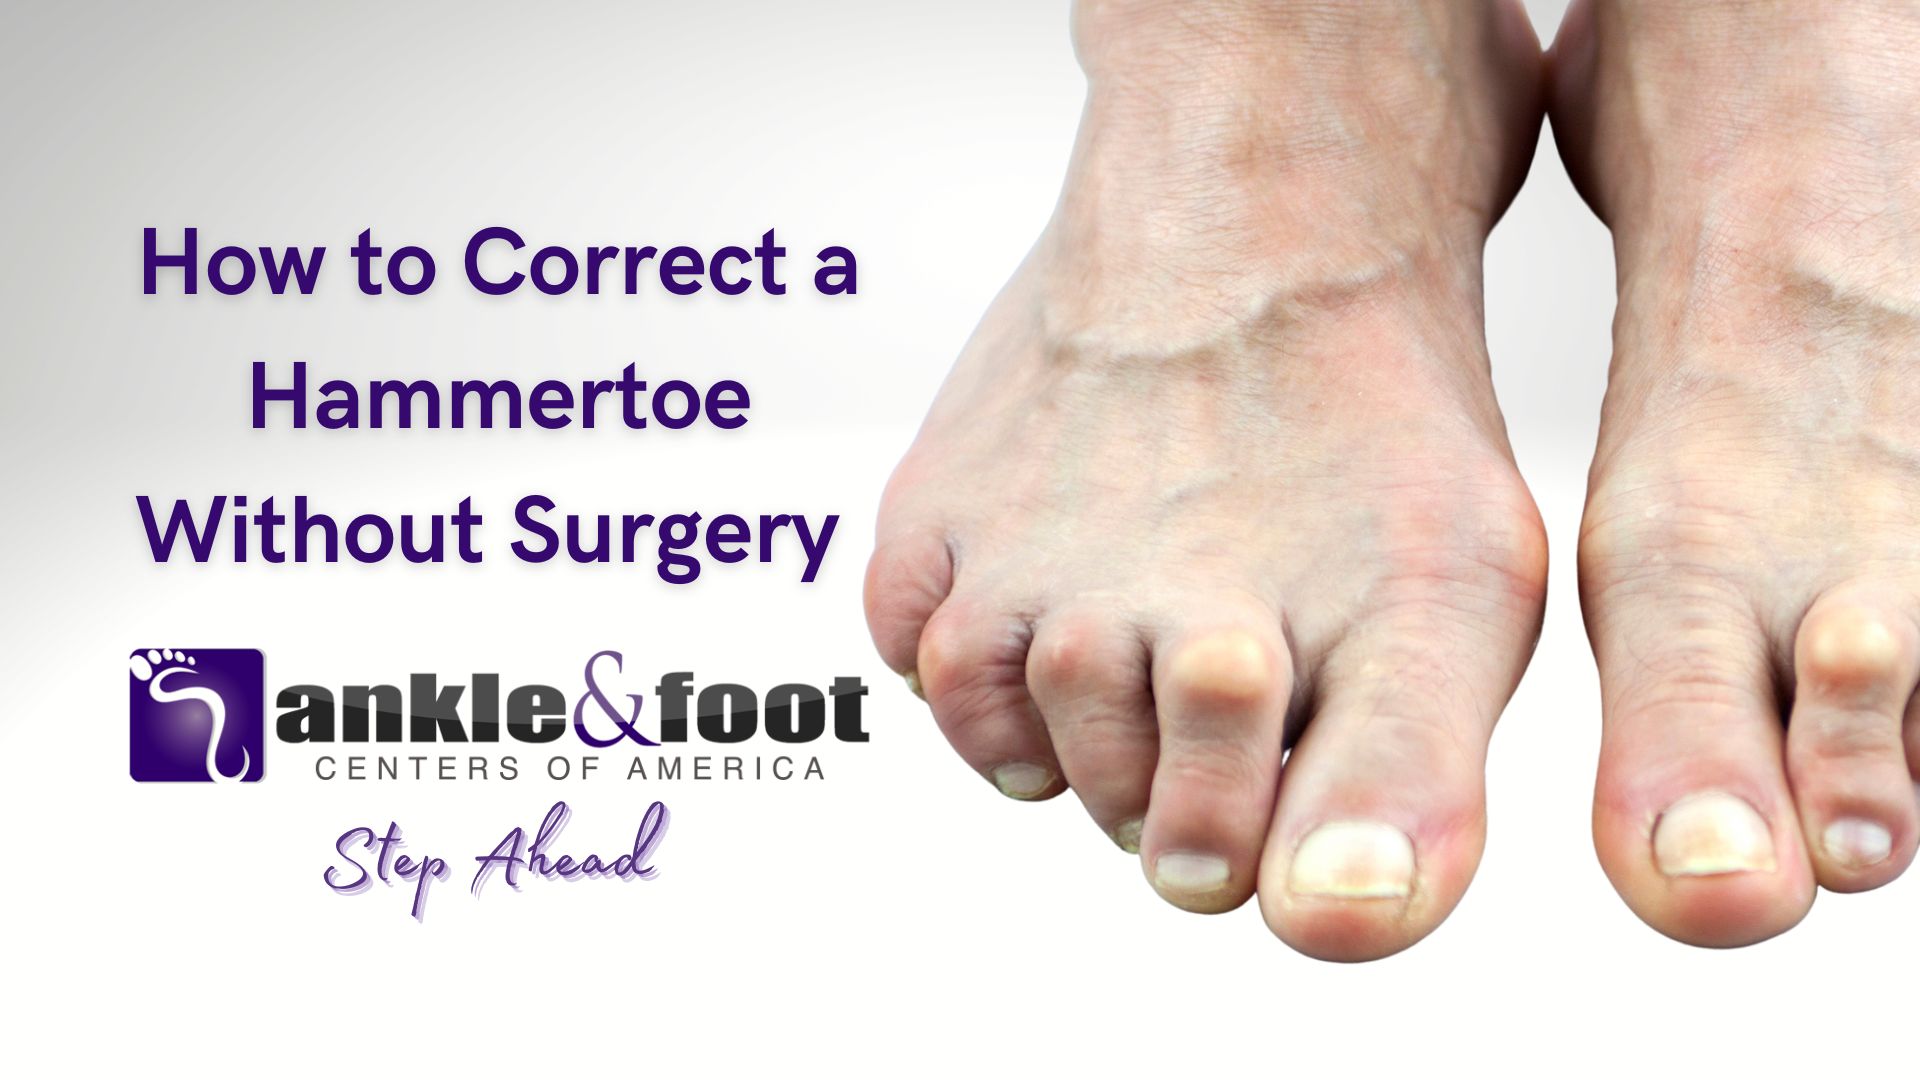 Non-Surgical Treatment for Hammertoe